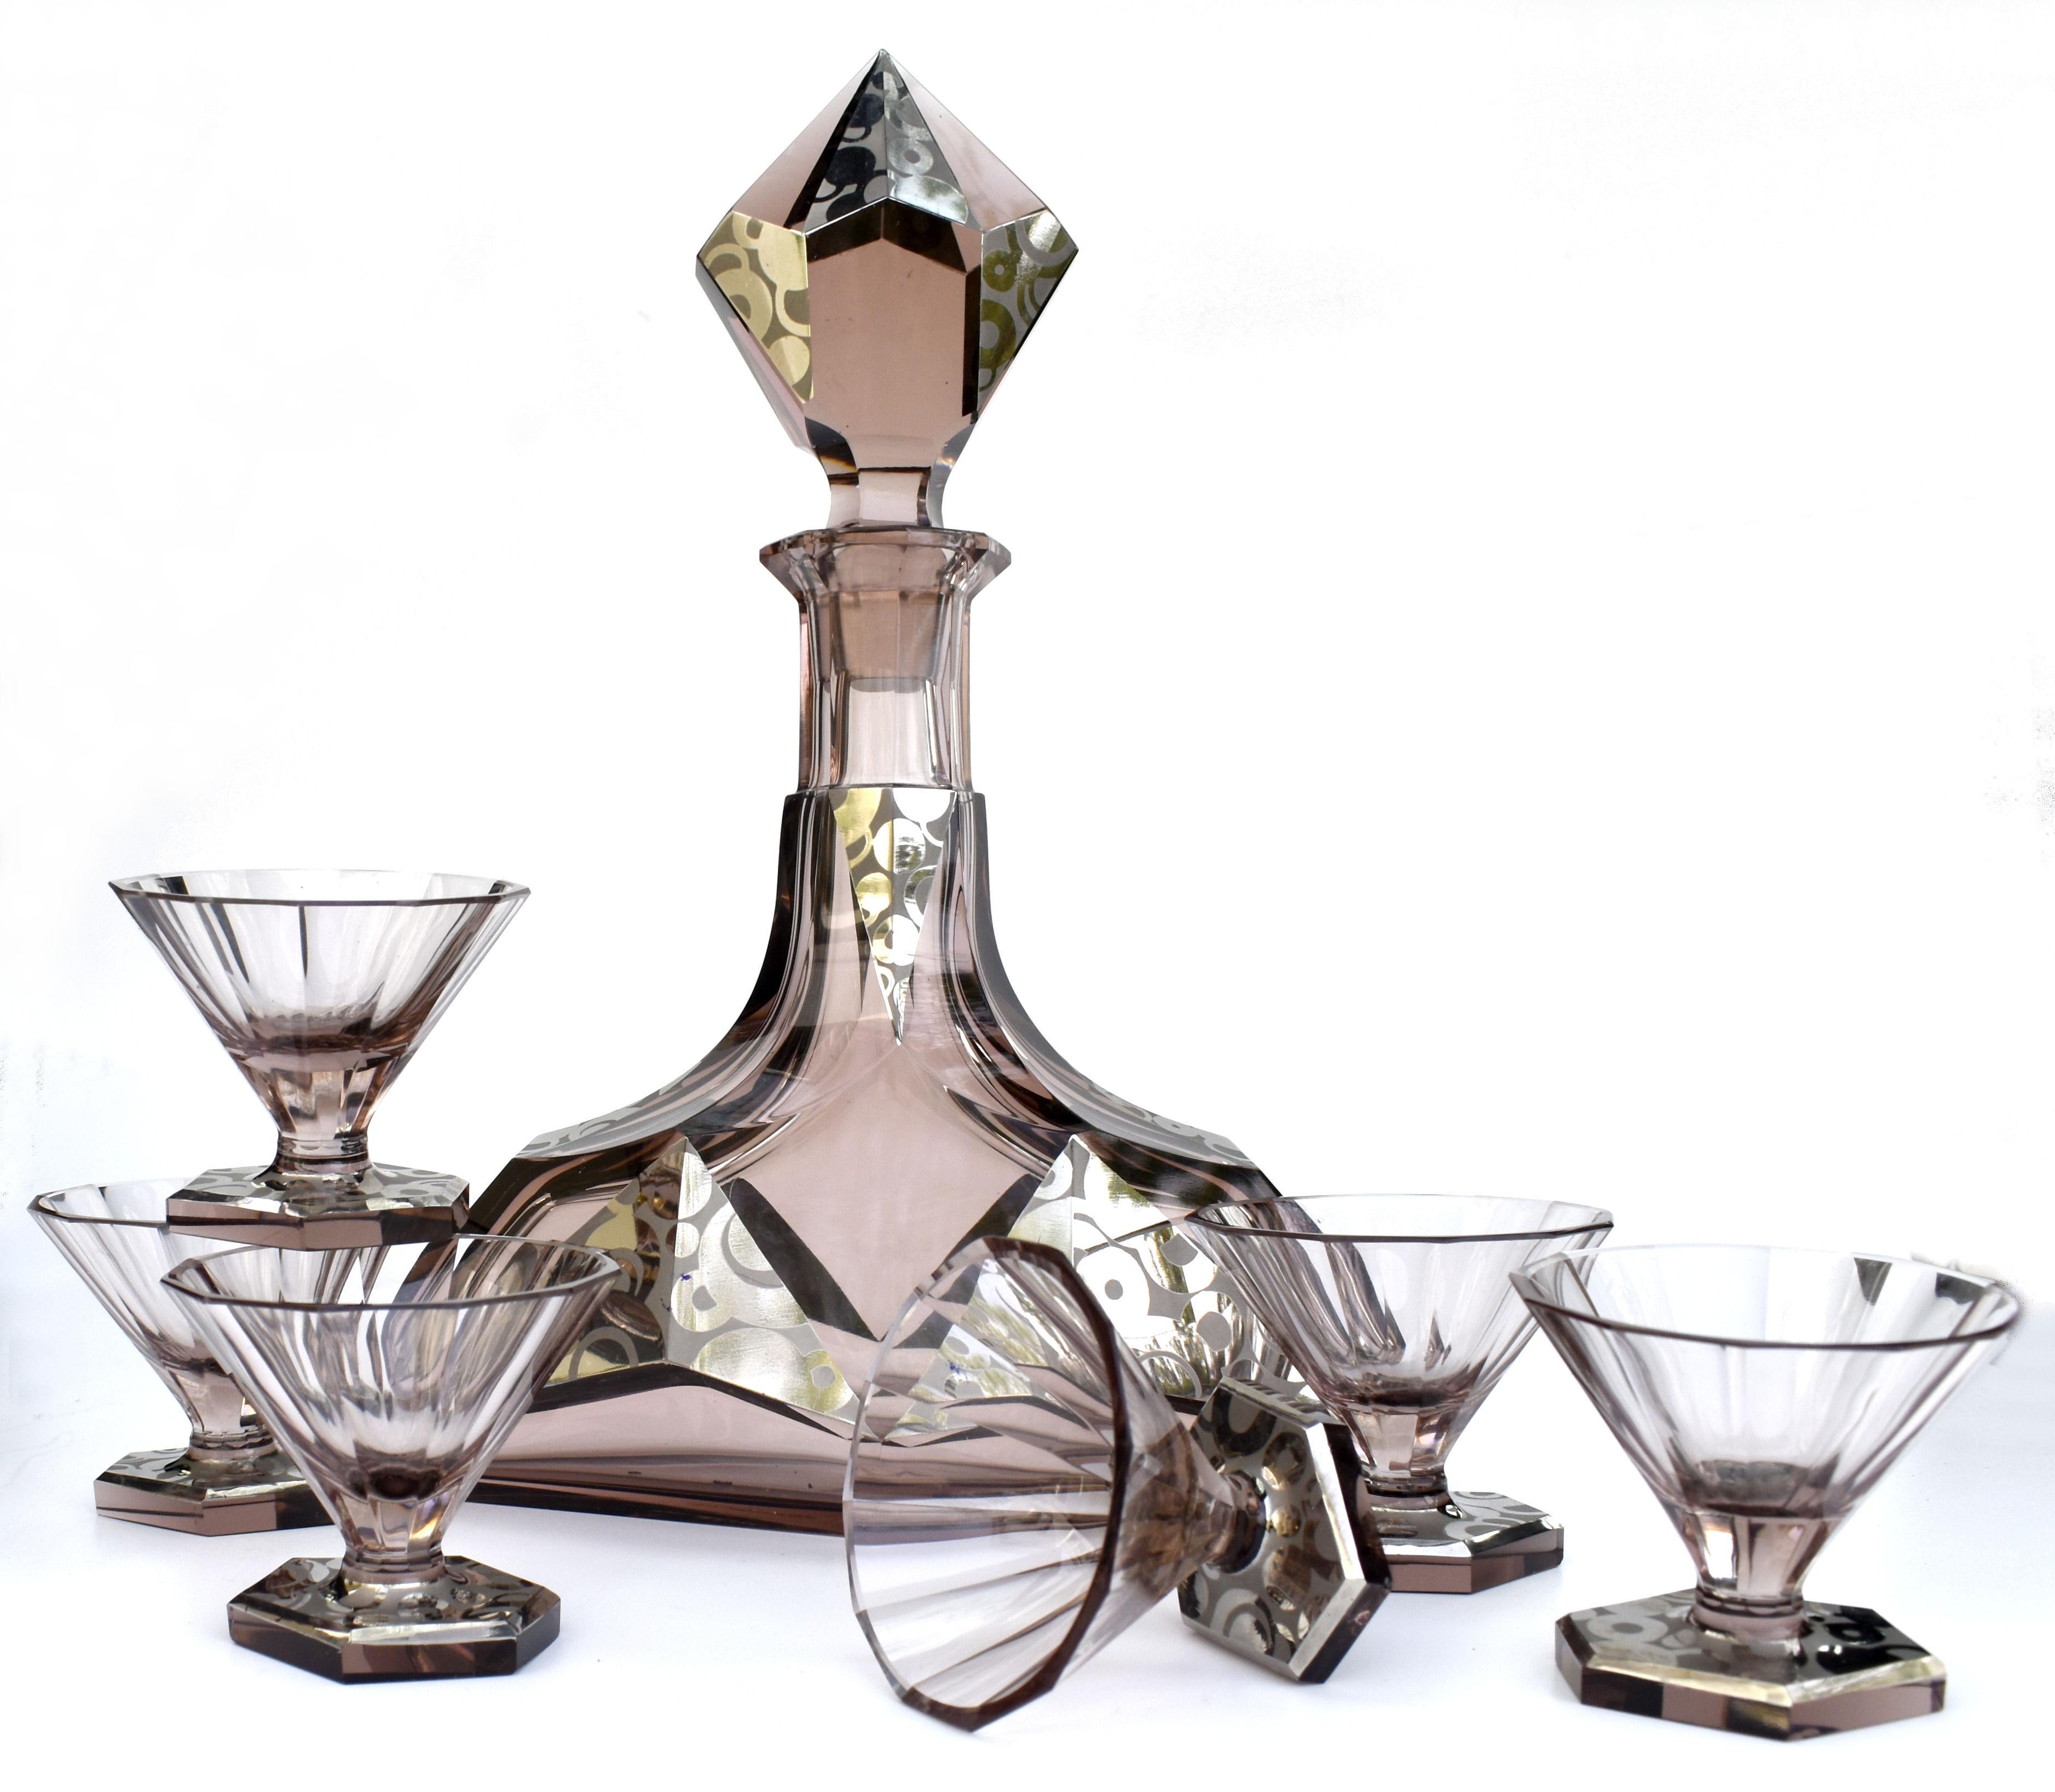 Art Deco Karl Palda Glass Decanter Set with 6 Matching Glasses, C1930 For Sale 6